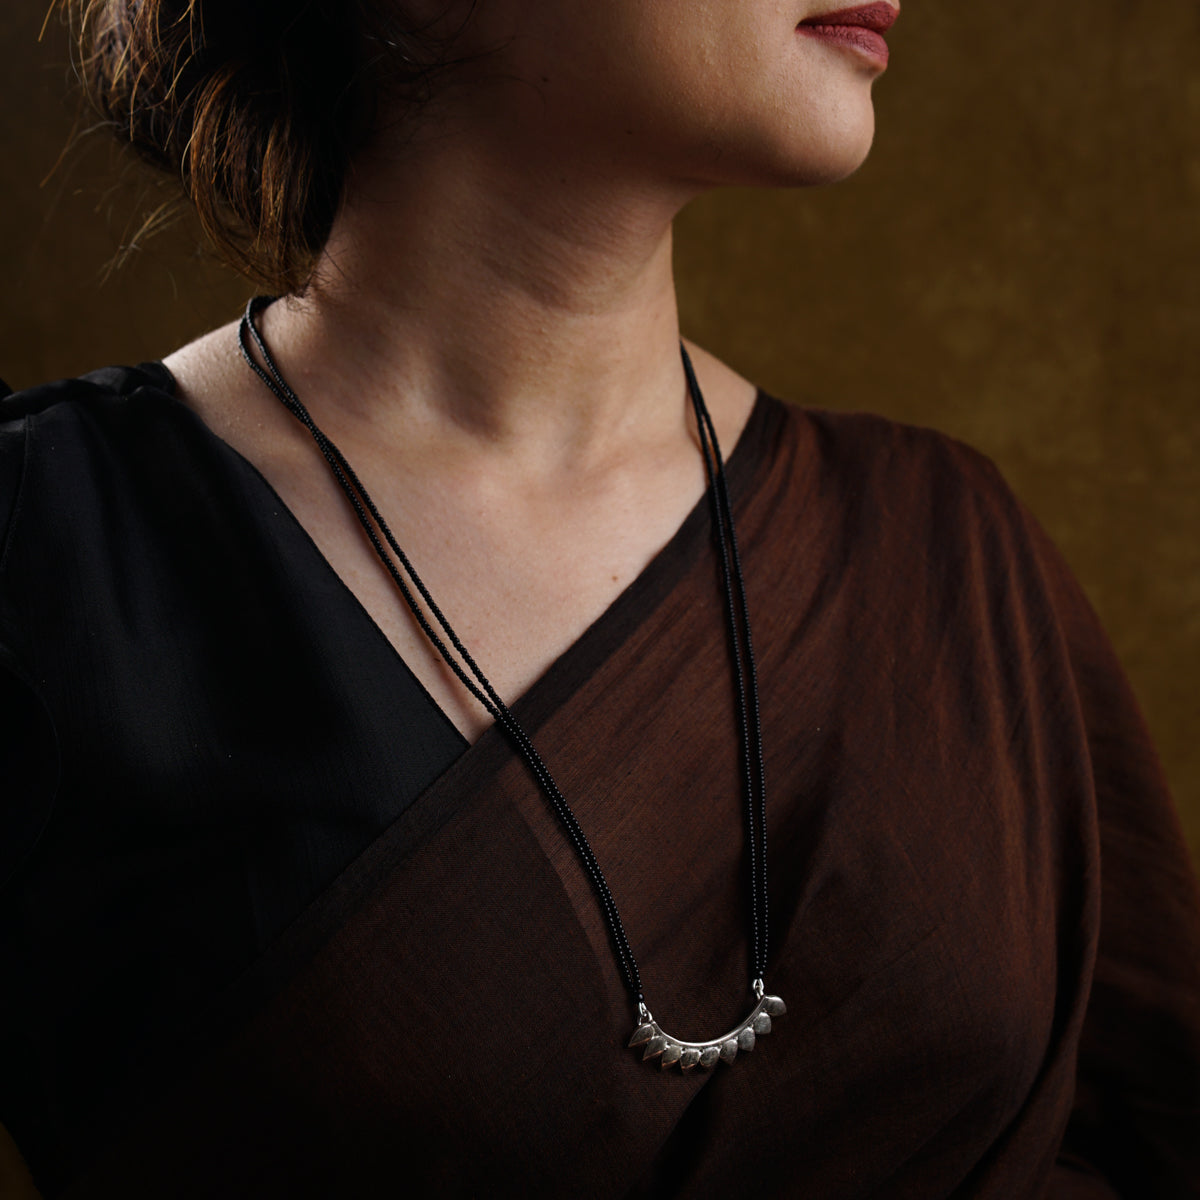 a woman wearing a brown shirt and a necklace